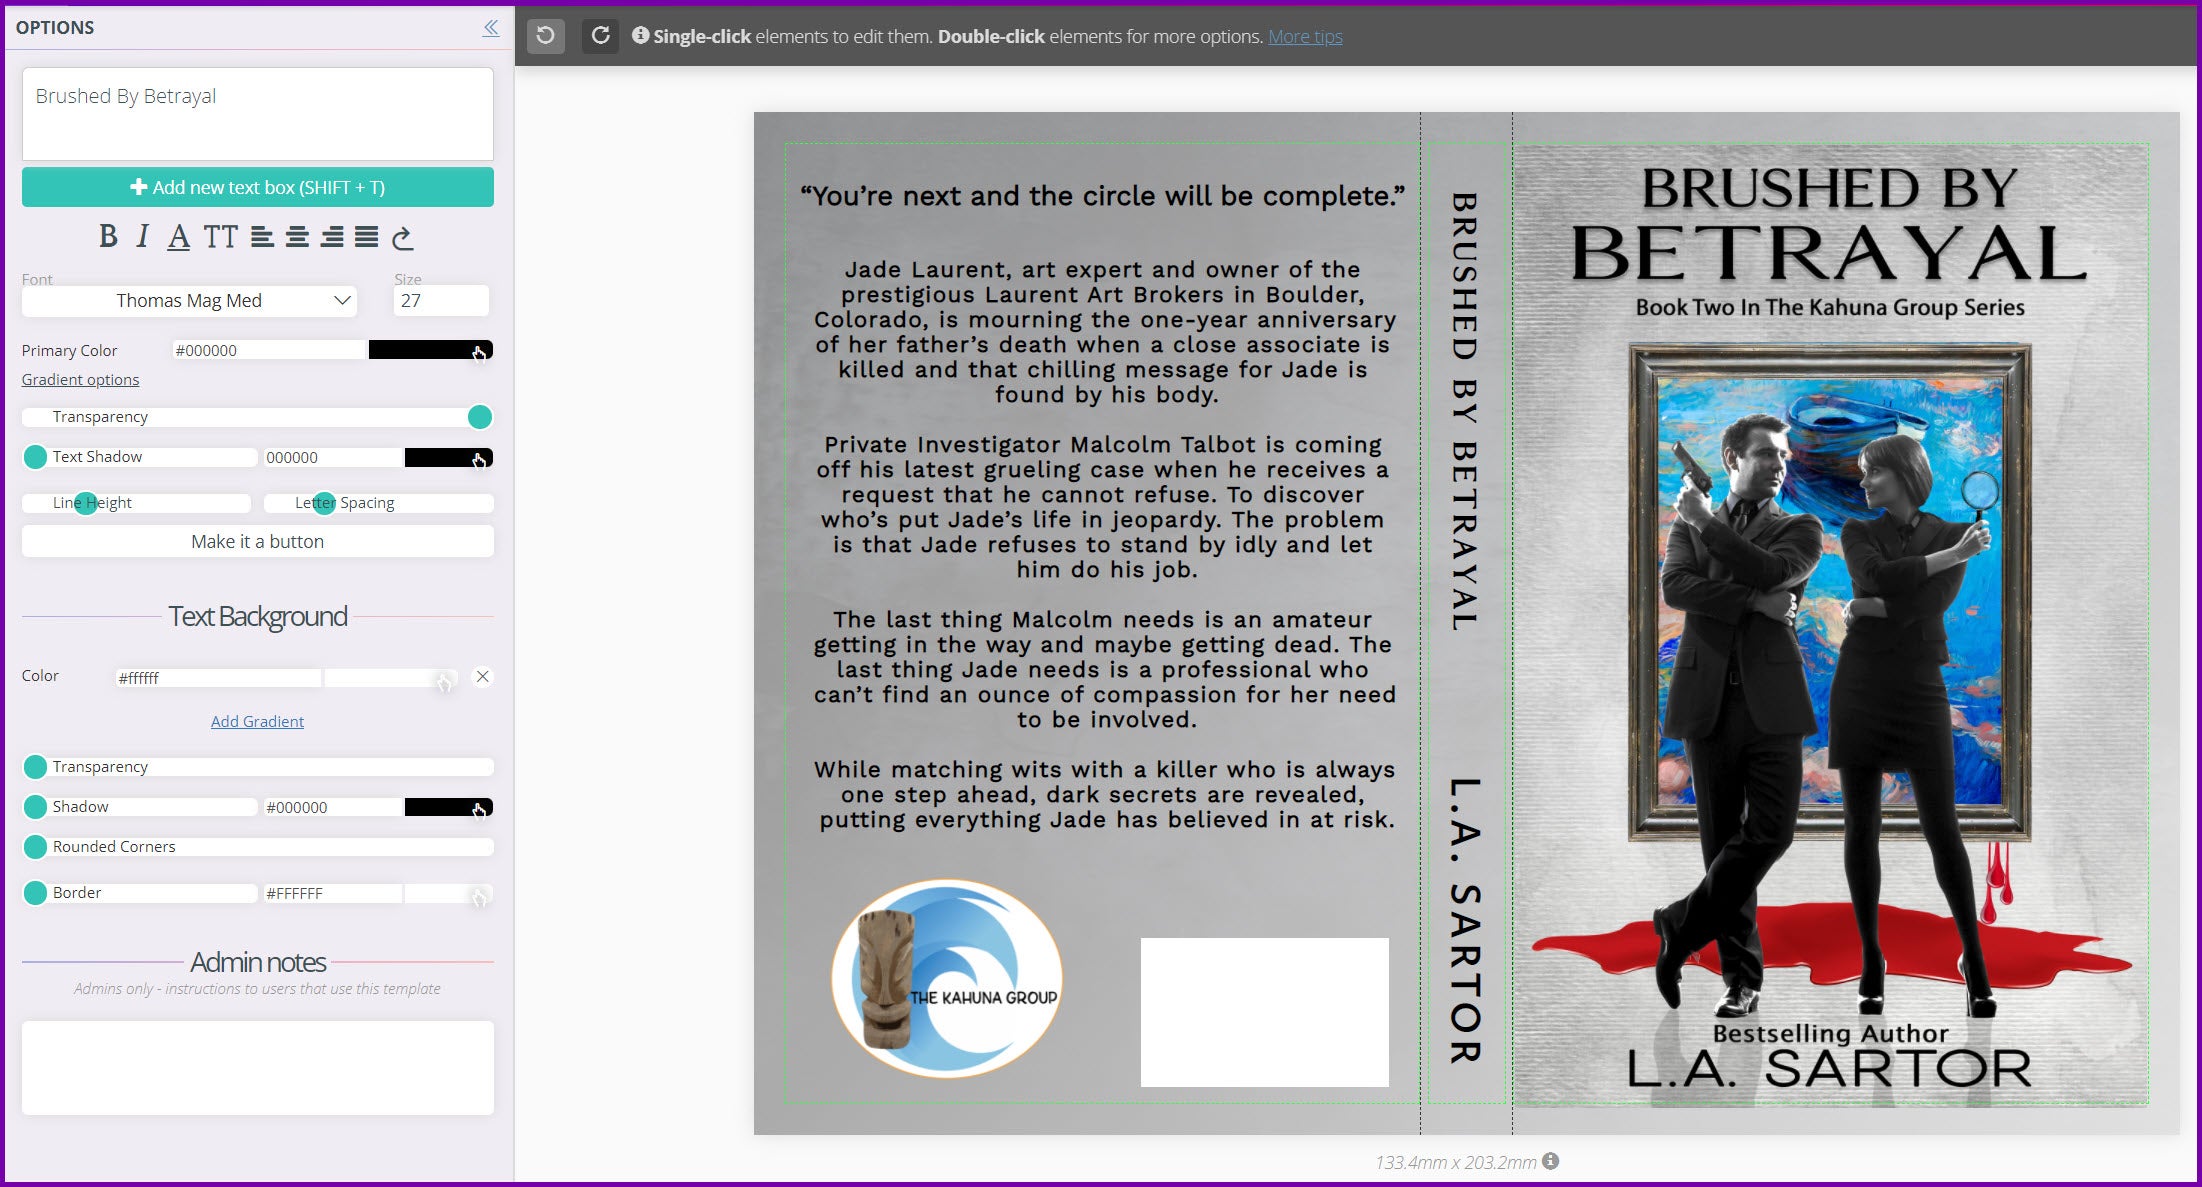 Image of cover for Betrayal of the Trust by L.A. Sartor with infographic on last creation steps